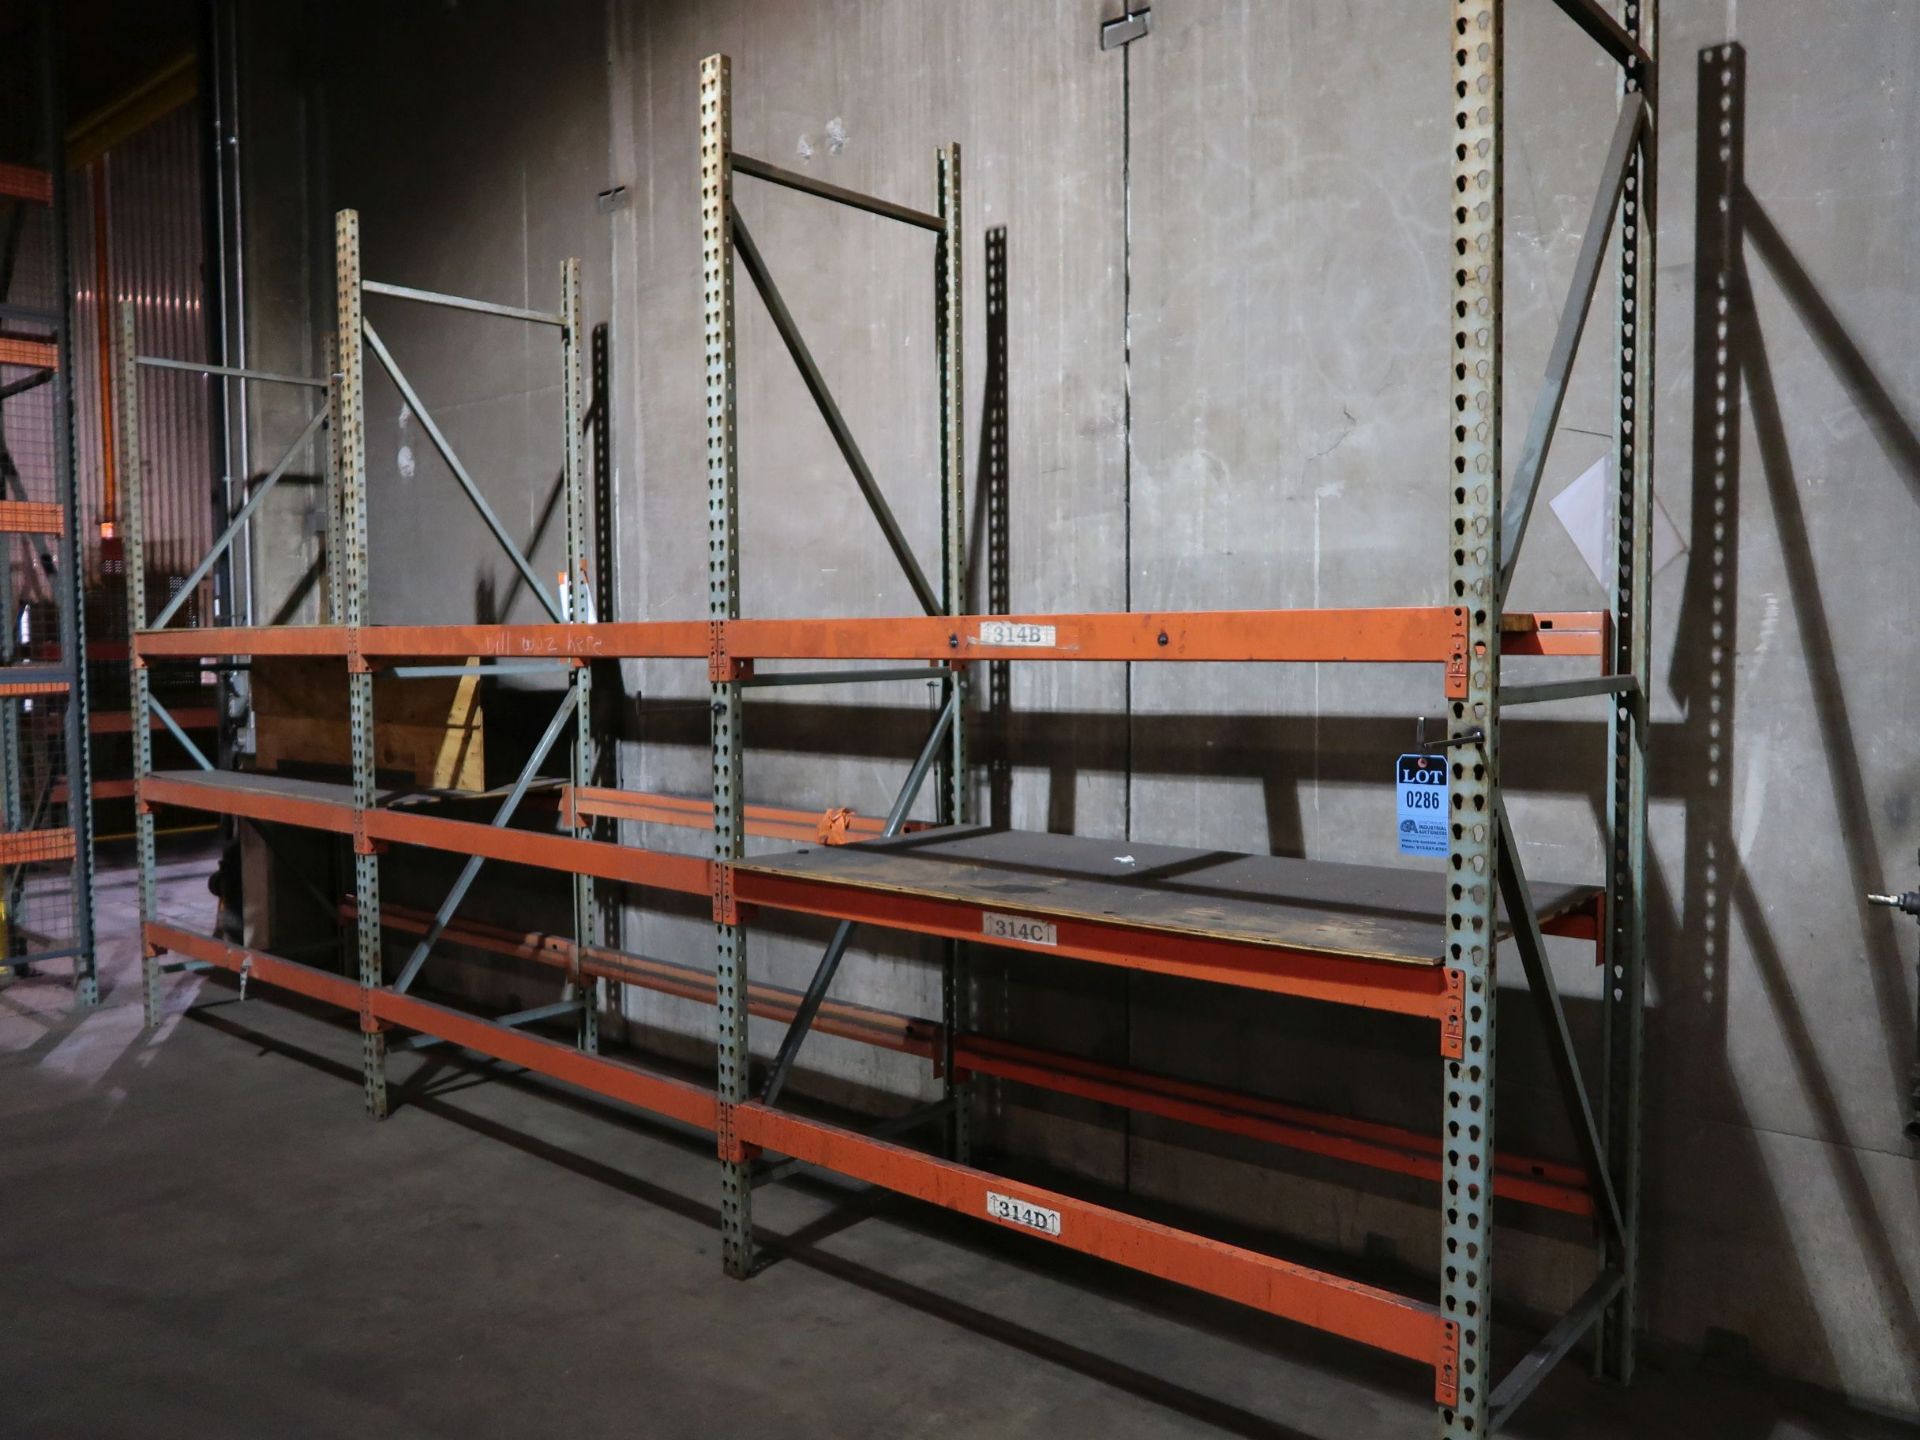 SECTIONS 36" X 72" X 120" HIGH ADJUSTABLE BEAM TEAR DROP STYLE PALLET RACK